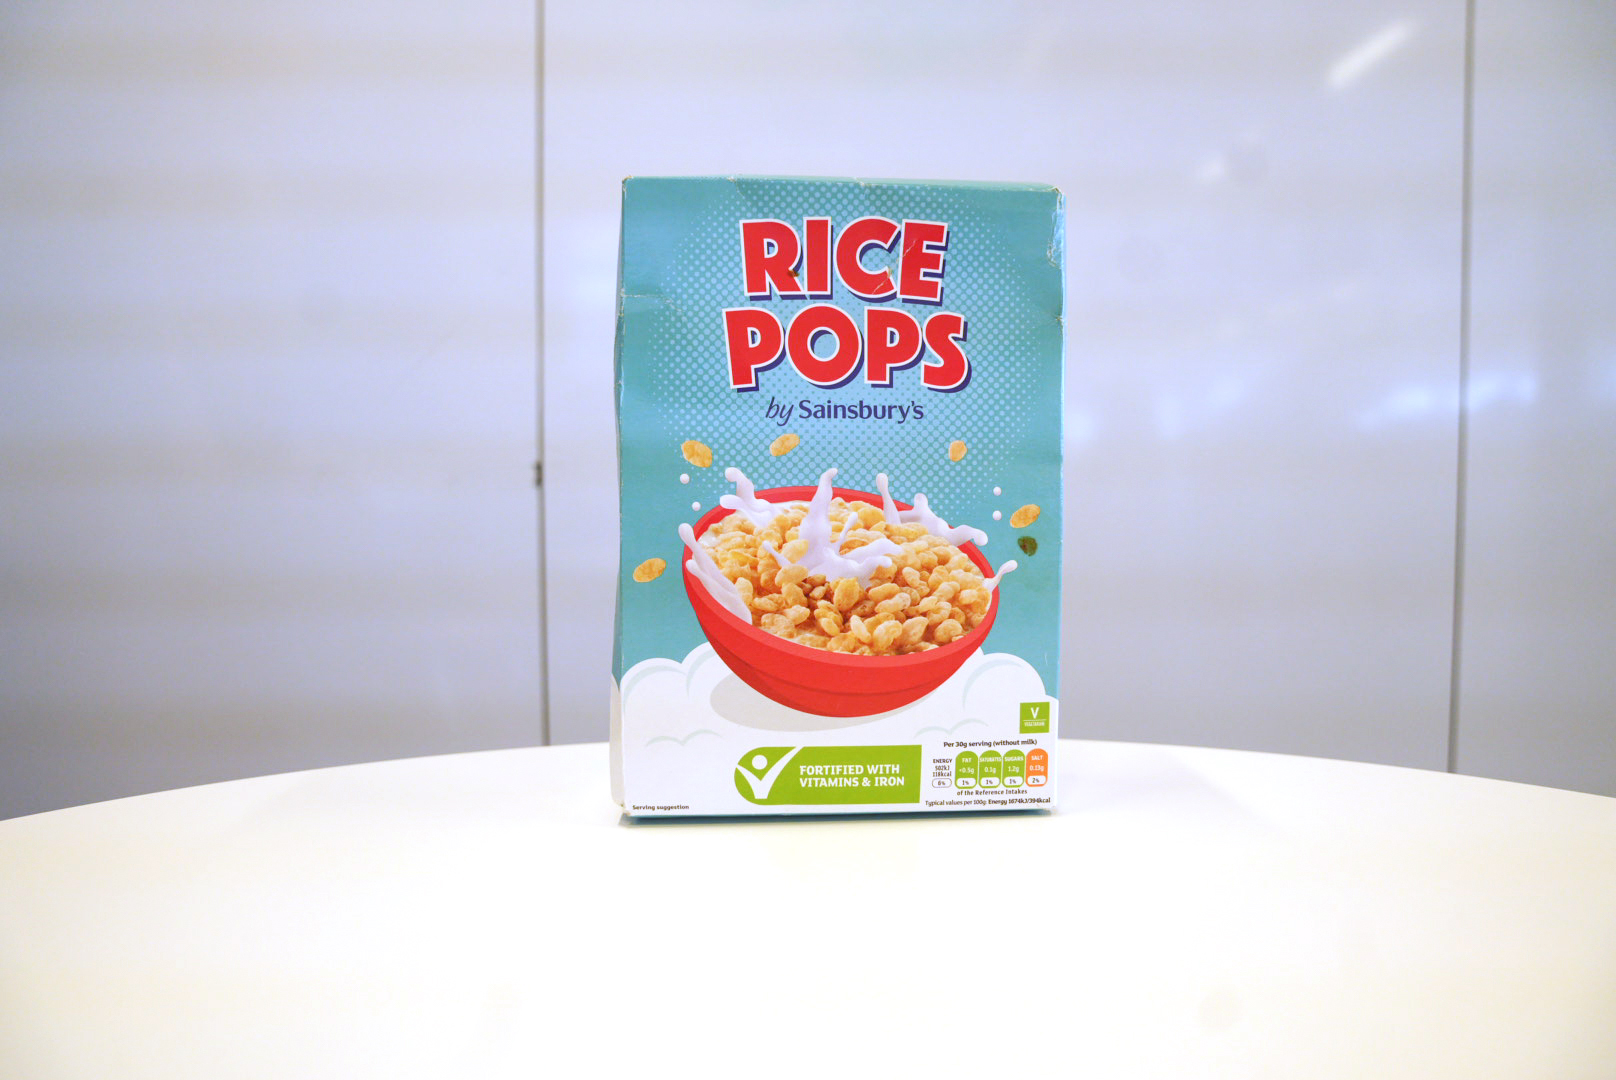 Sainsbury's' rice pops had the most unique flavour out of all the versions I tried